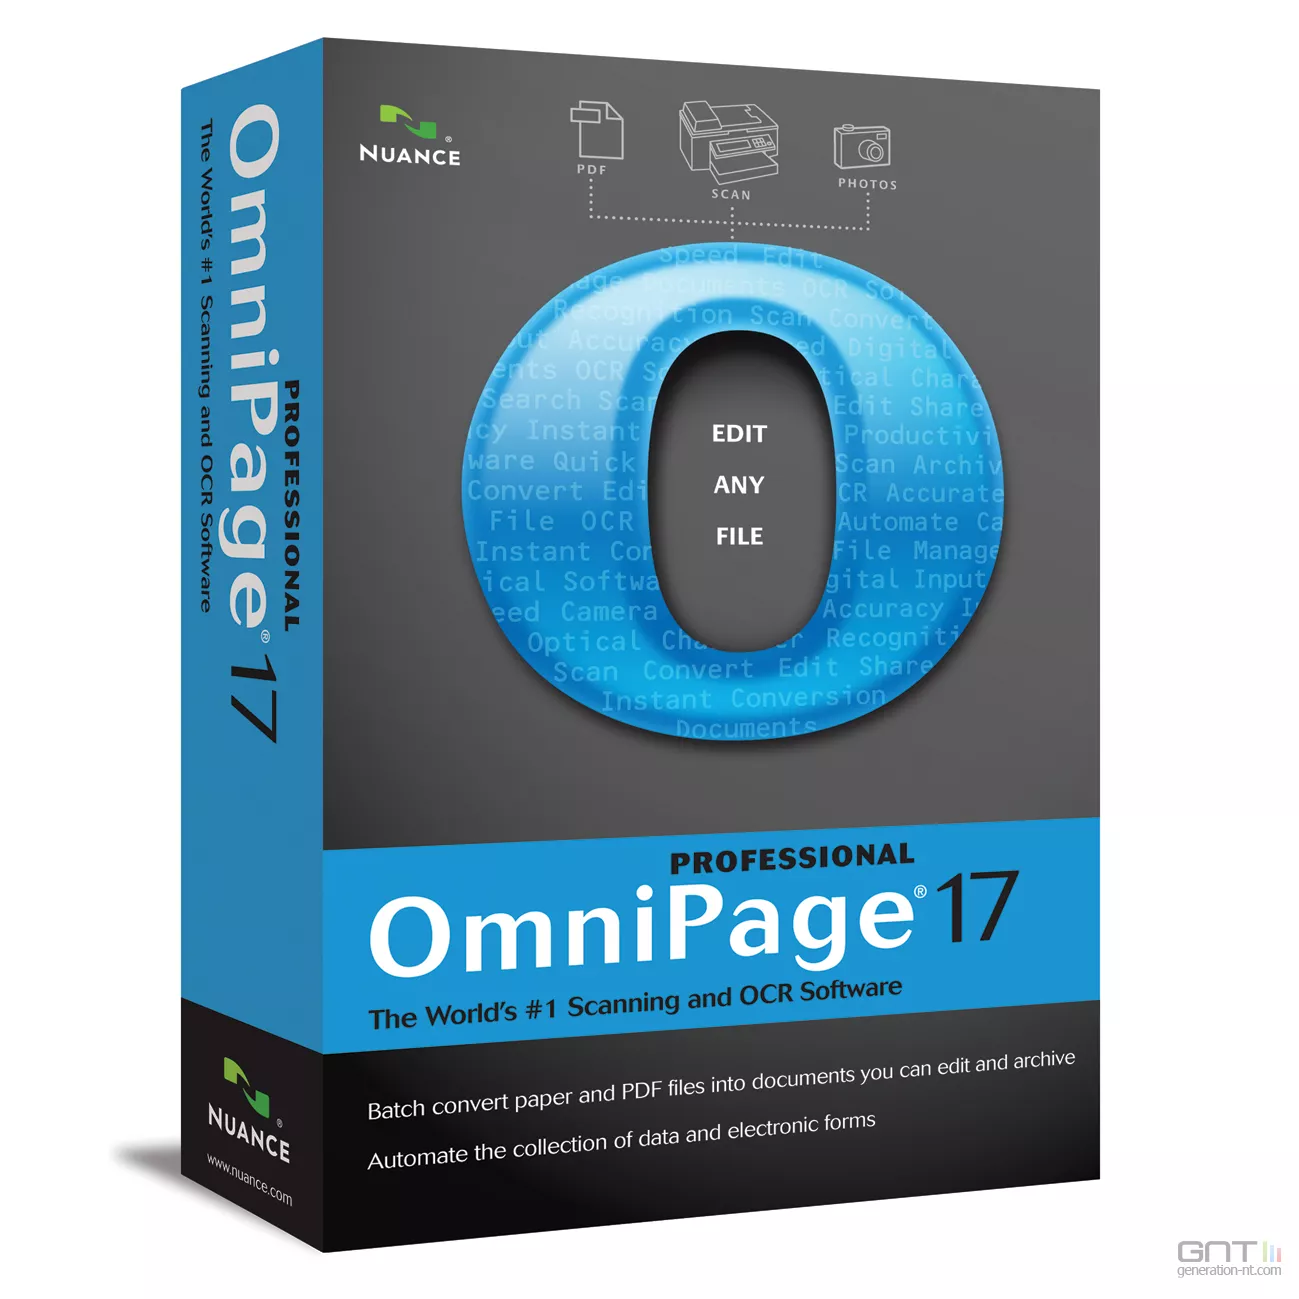 Omnipagepro